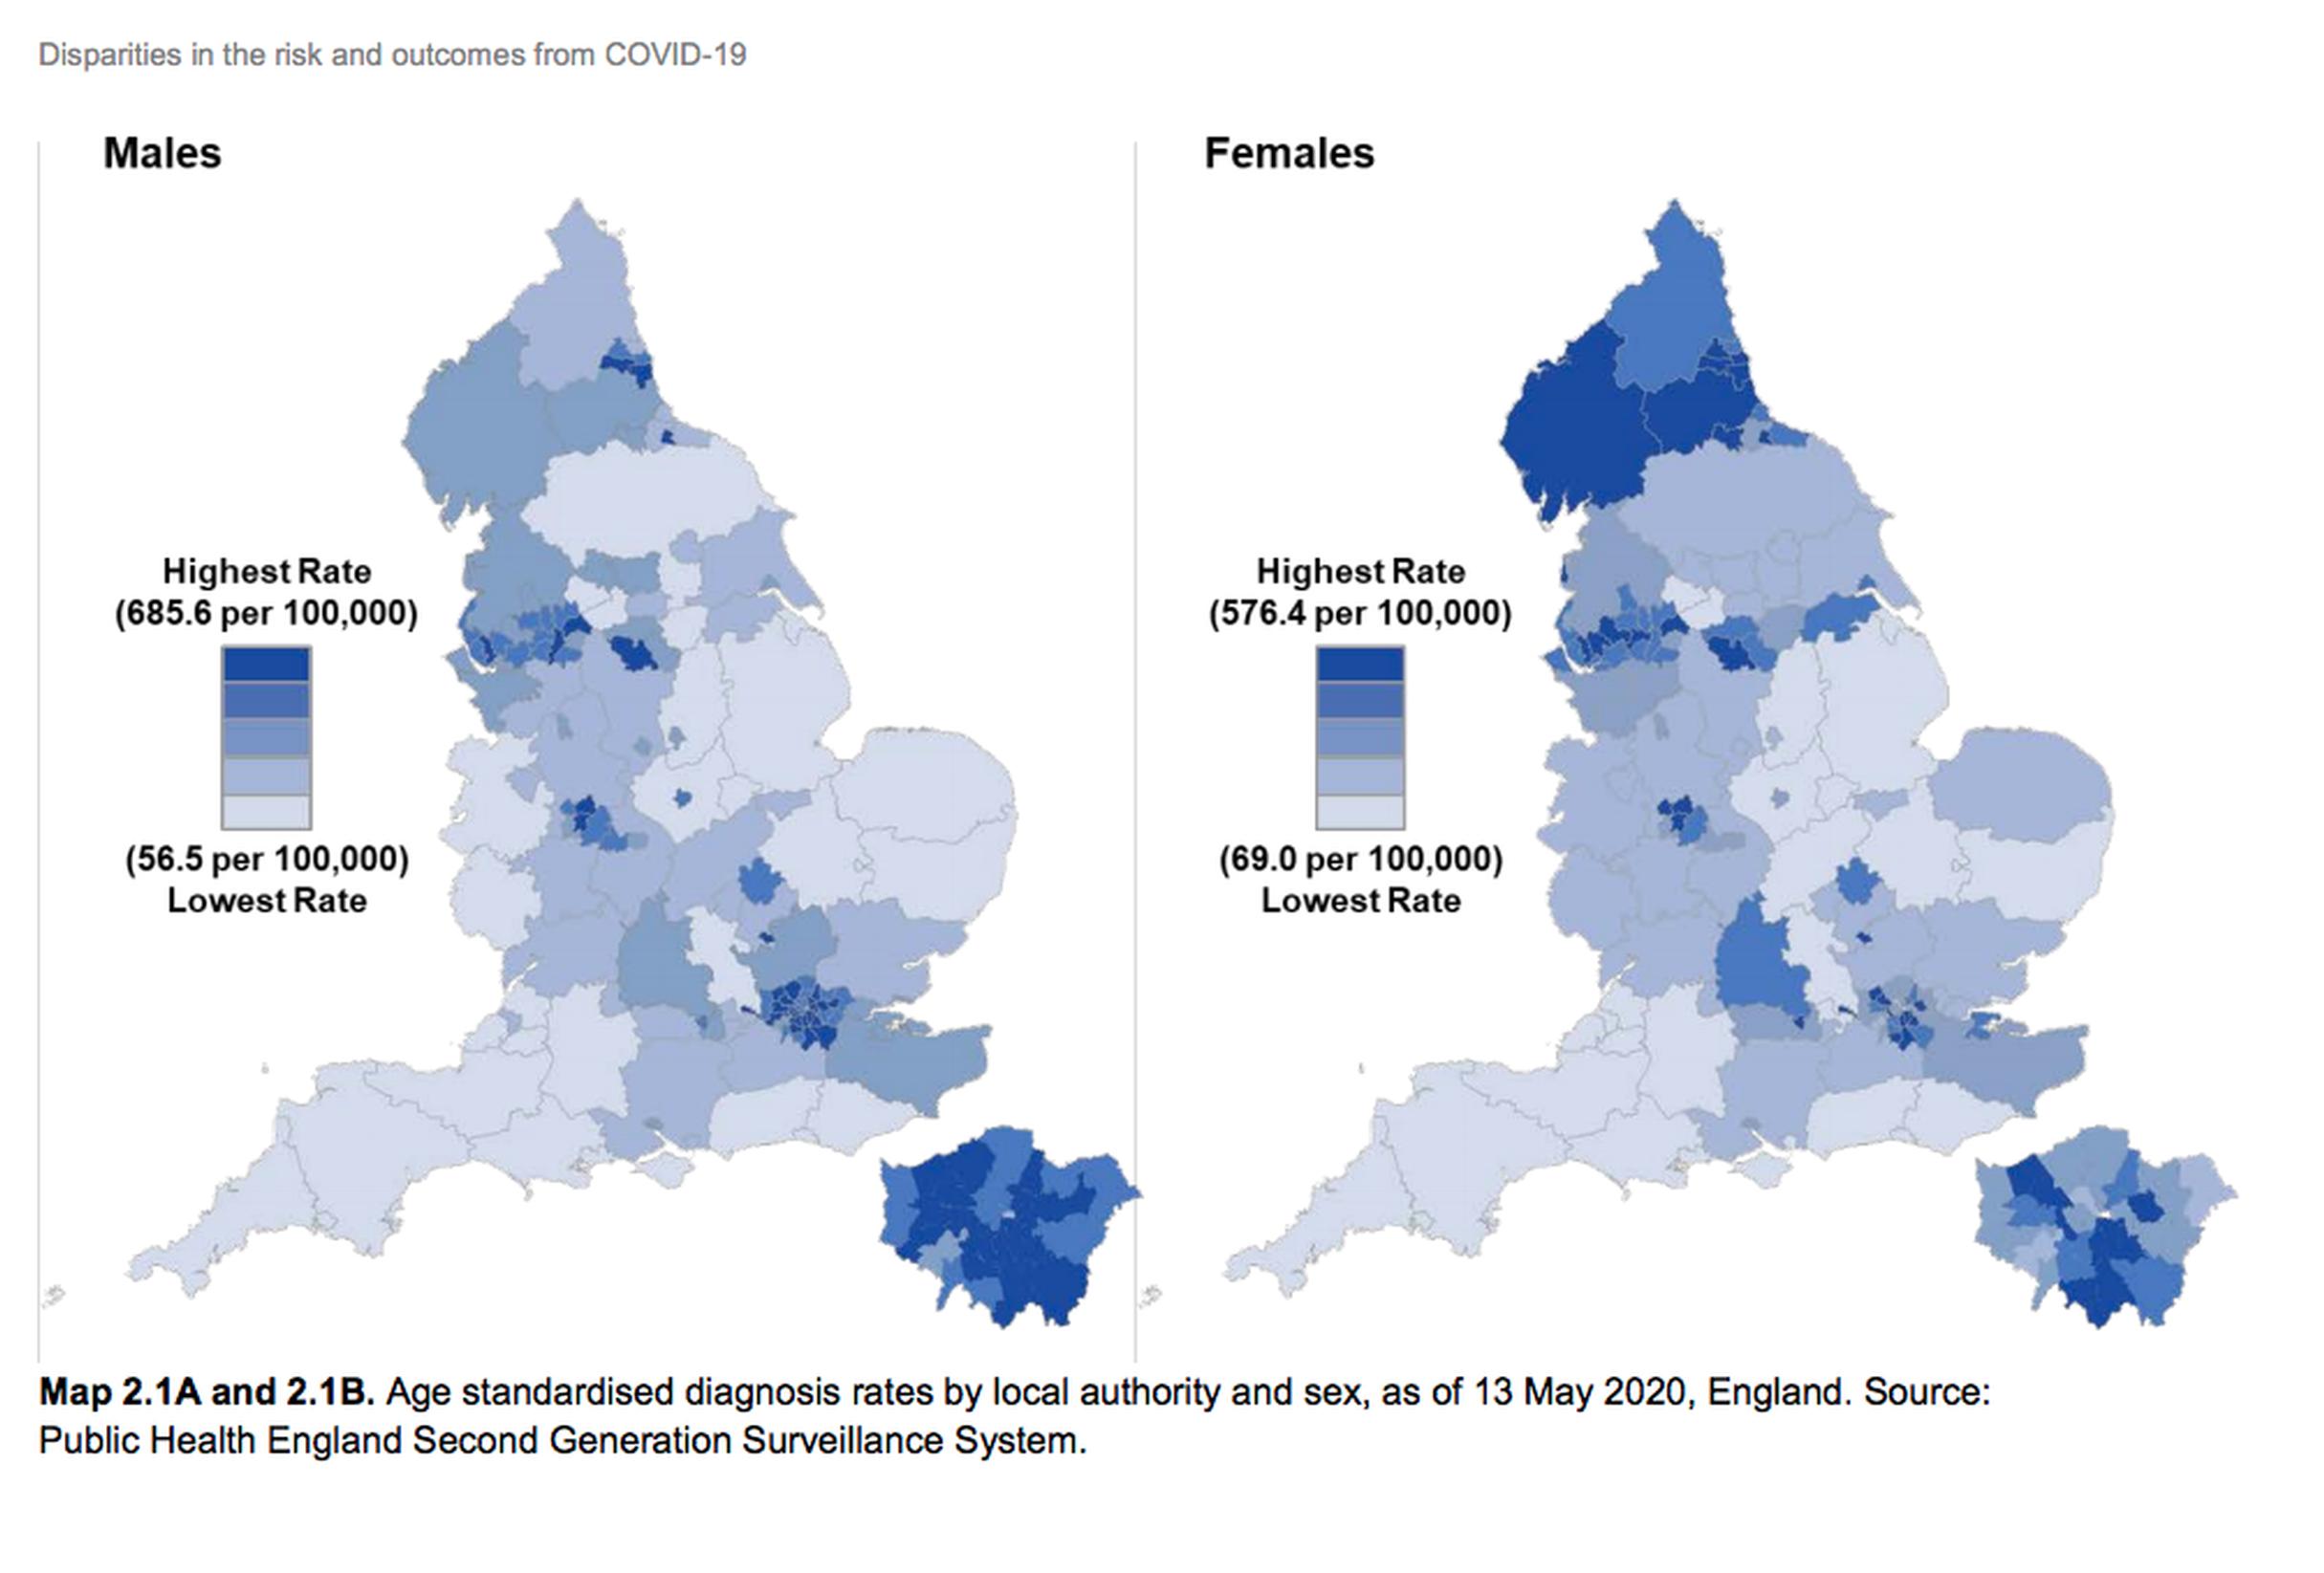 Age standardised COVID diagnosis rates by local authority and sex, as of 13 May 2020, England. Source: Public Health England Second Generation Surveillance System